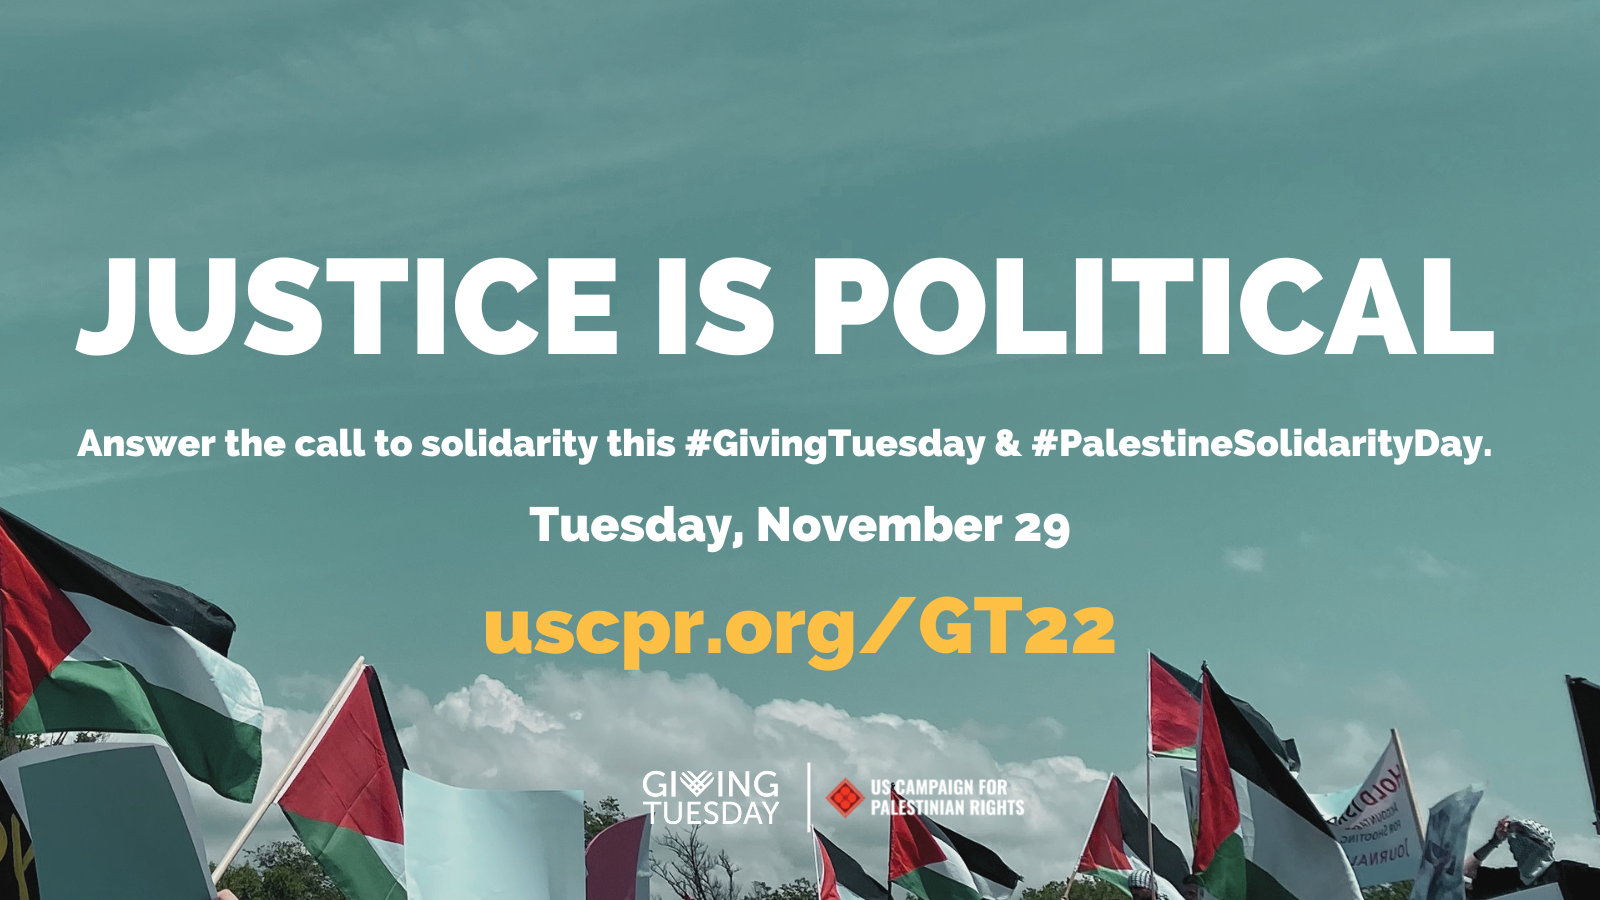 Justice is political. Answer the call to solidarity this #GivingTuesday & #PalestineSolidarityDay. Tuesday, November 29 uscpr.org/GT22